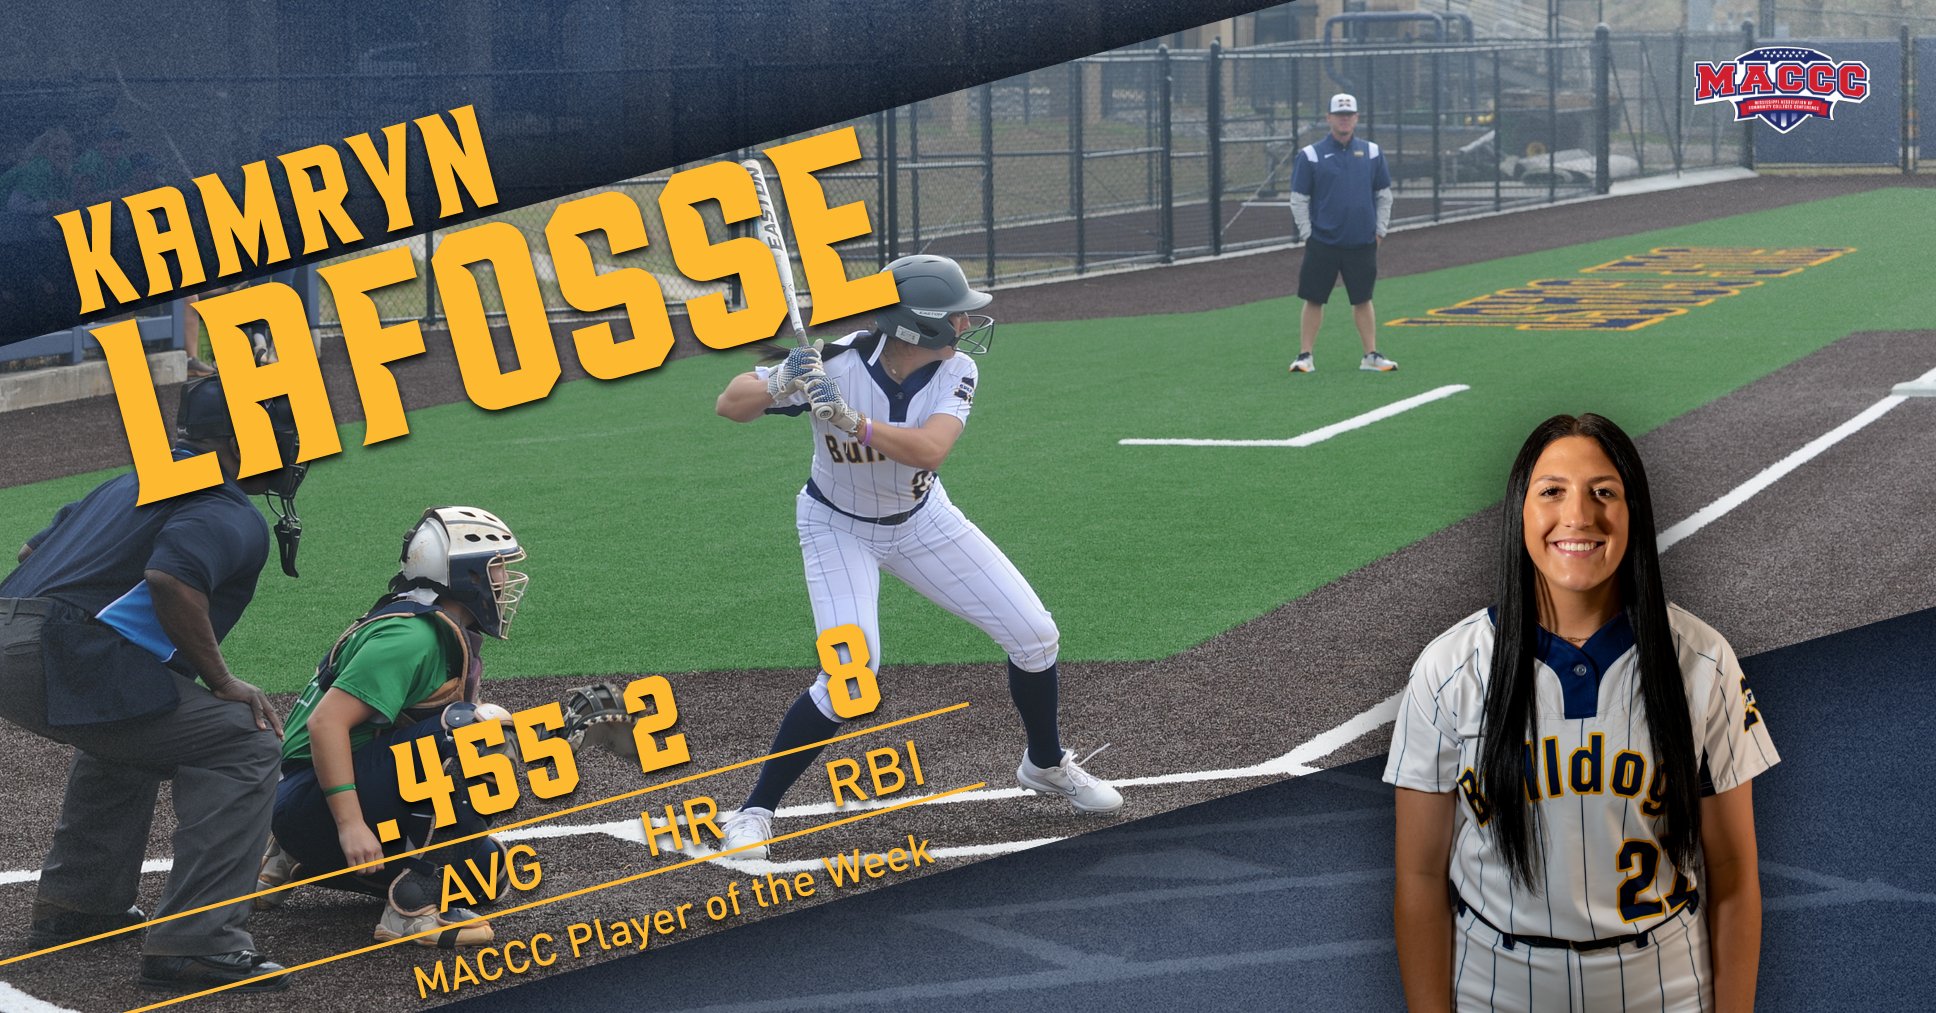 LaFosse named MACCC Player of the Week